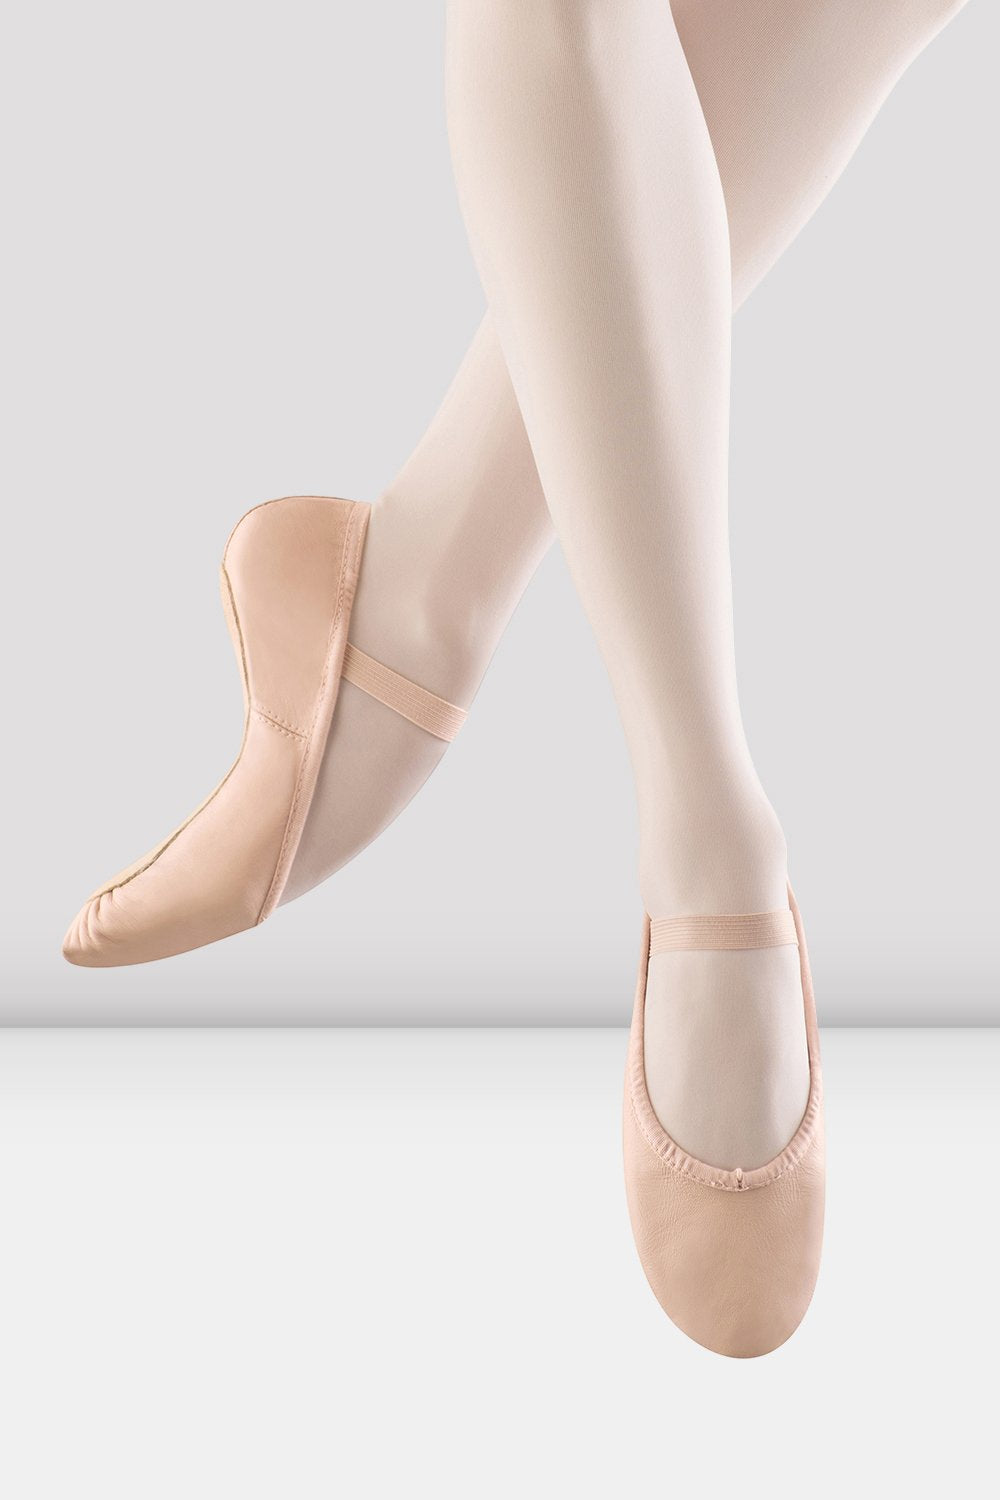 Ballerina Tights in Pink or Black Ballet Shoes for Baby to Little Girls 